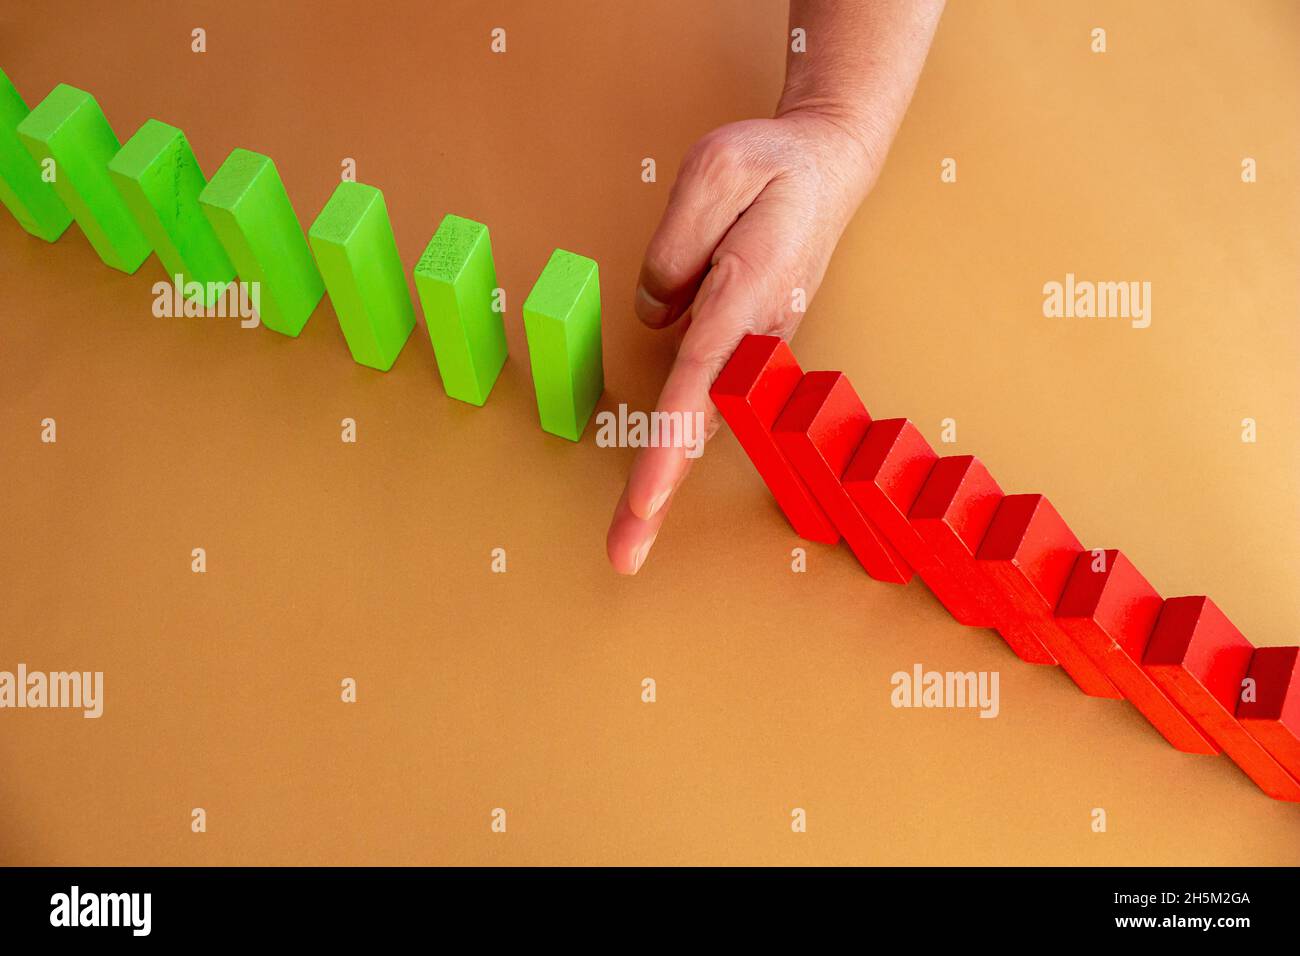 Close up business woman hand stopping wooden blocks from falling. Concept of risk and crisis management in business life. Stock Photo